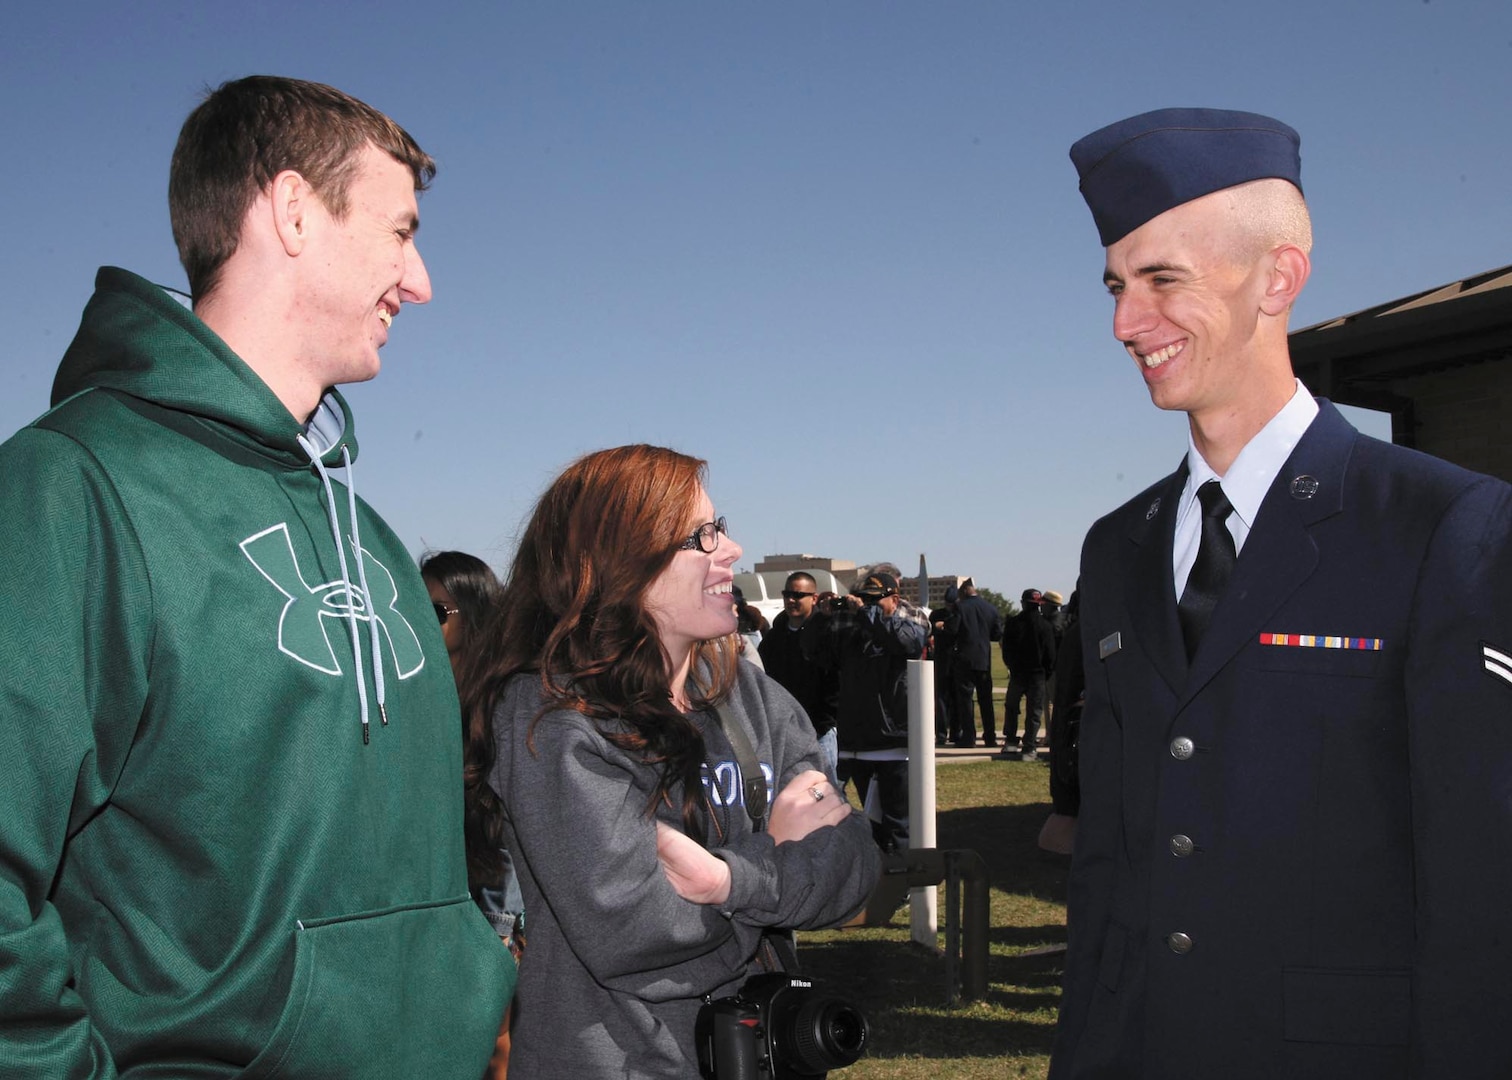 Airman First Class Devin Tillman (right) receives congratulations from his brother, William Tillman, and his girlfriend, Aubree Larson, after Air Force Basic Military Training graduation April 19 at Joint Base San Antonio-Lackland. Tillman’s family and friends traveled from Georgia to attend BMT graduation ceremonies.